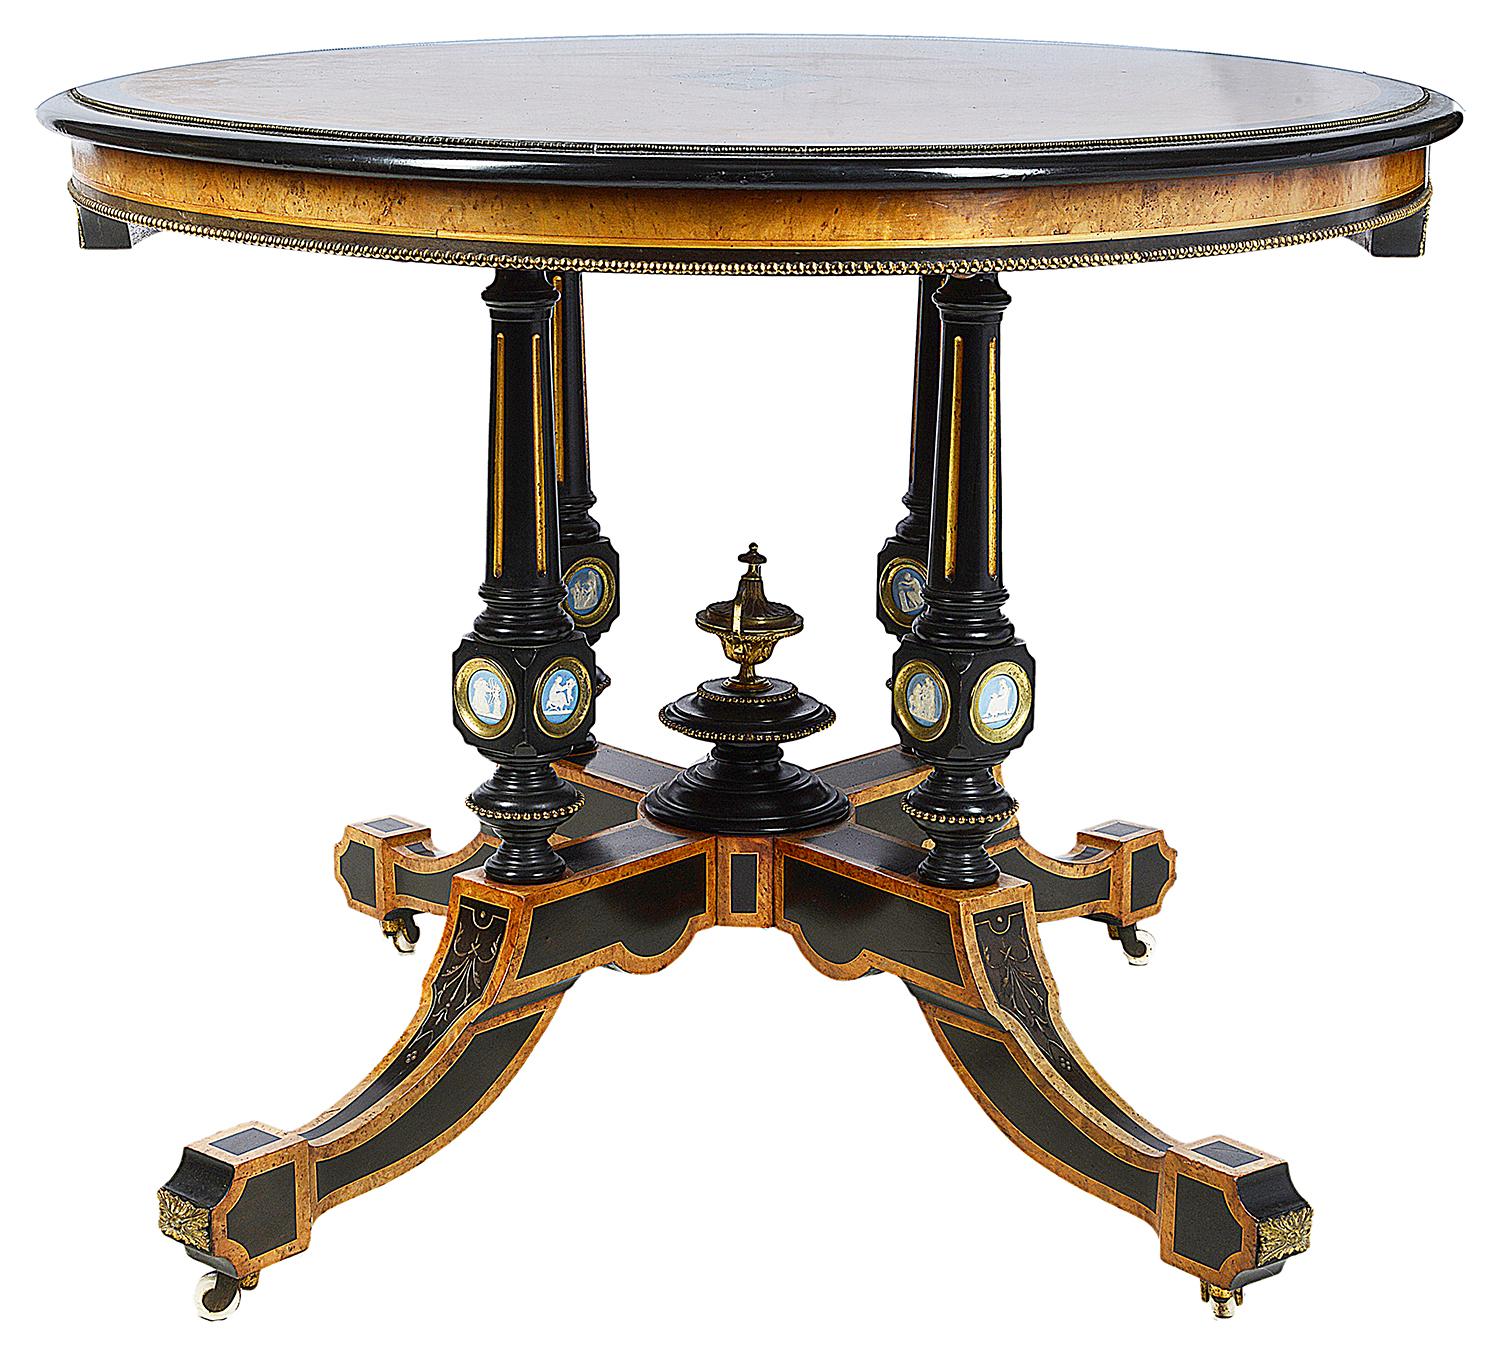 A very good quality 19th century Amboyna center table, with Wedgwood porcelain plaques depicting classical scenes, having parcel gilt decoration and ormolu mounts and raised on a four splay base.
In the manner of Holland and Son.

The firm of